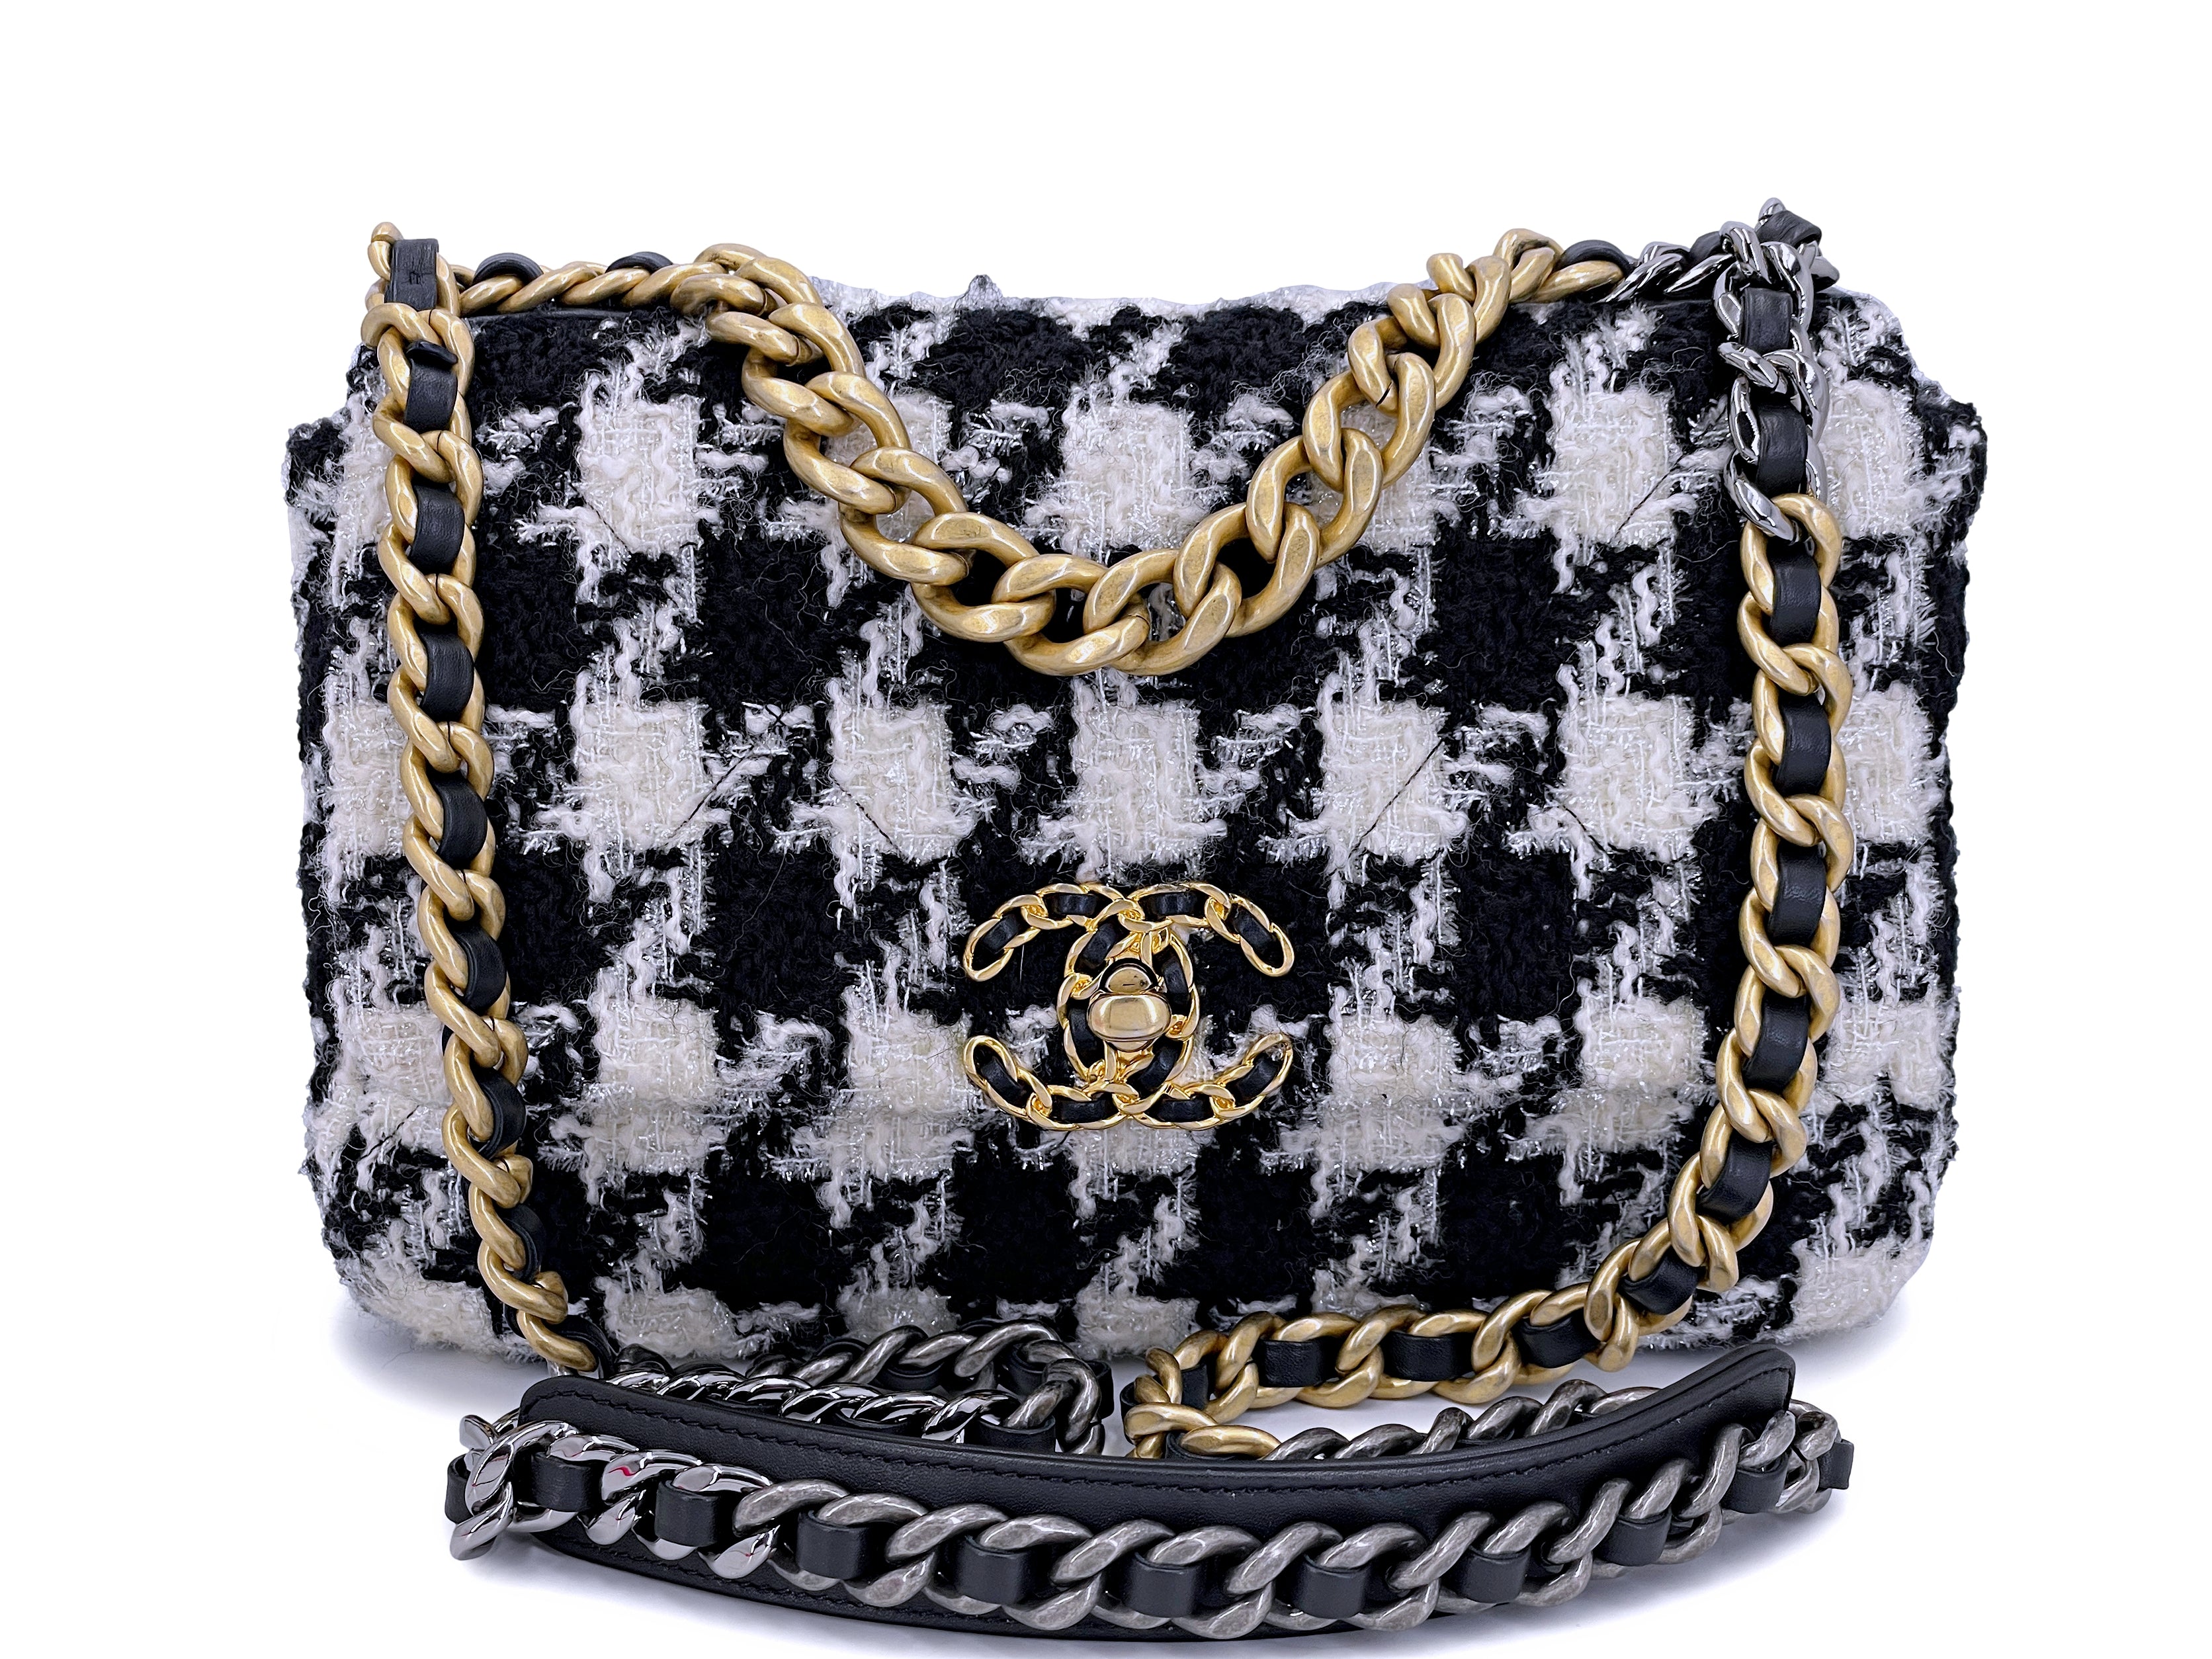 Chanel 19 Small Medium Houndstooth Tweed Flap Bag 67226 For Sale